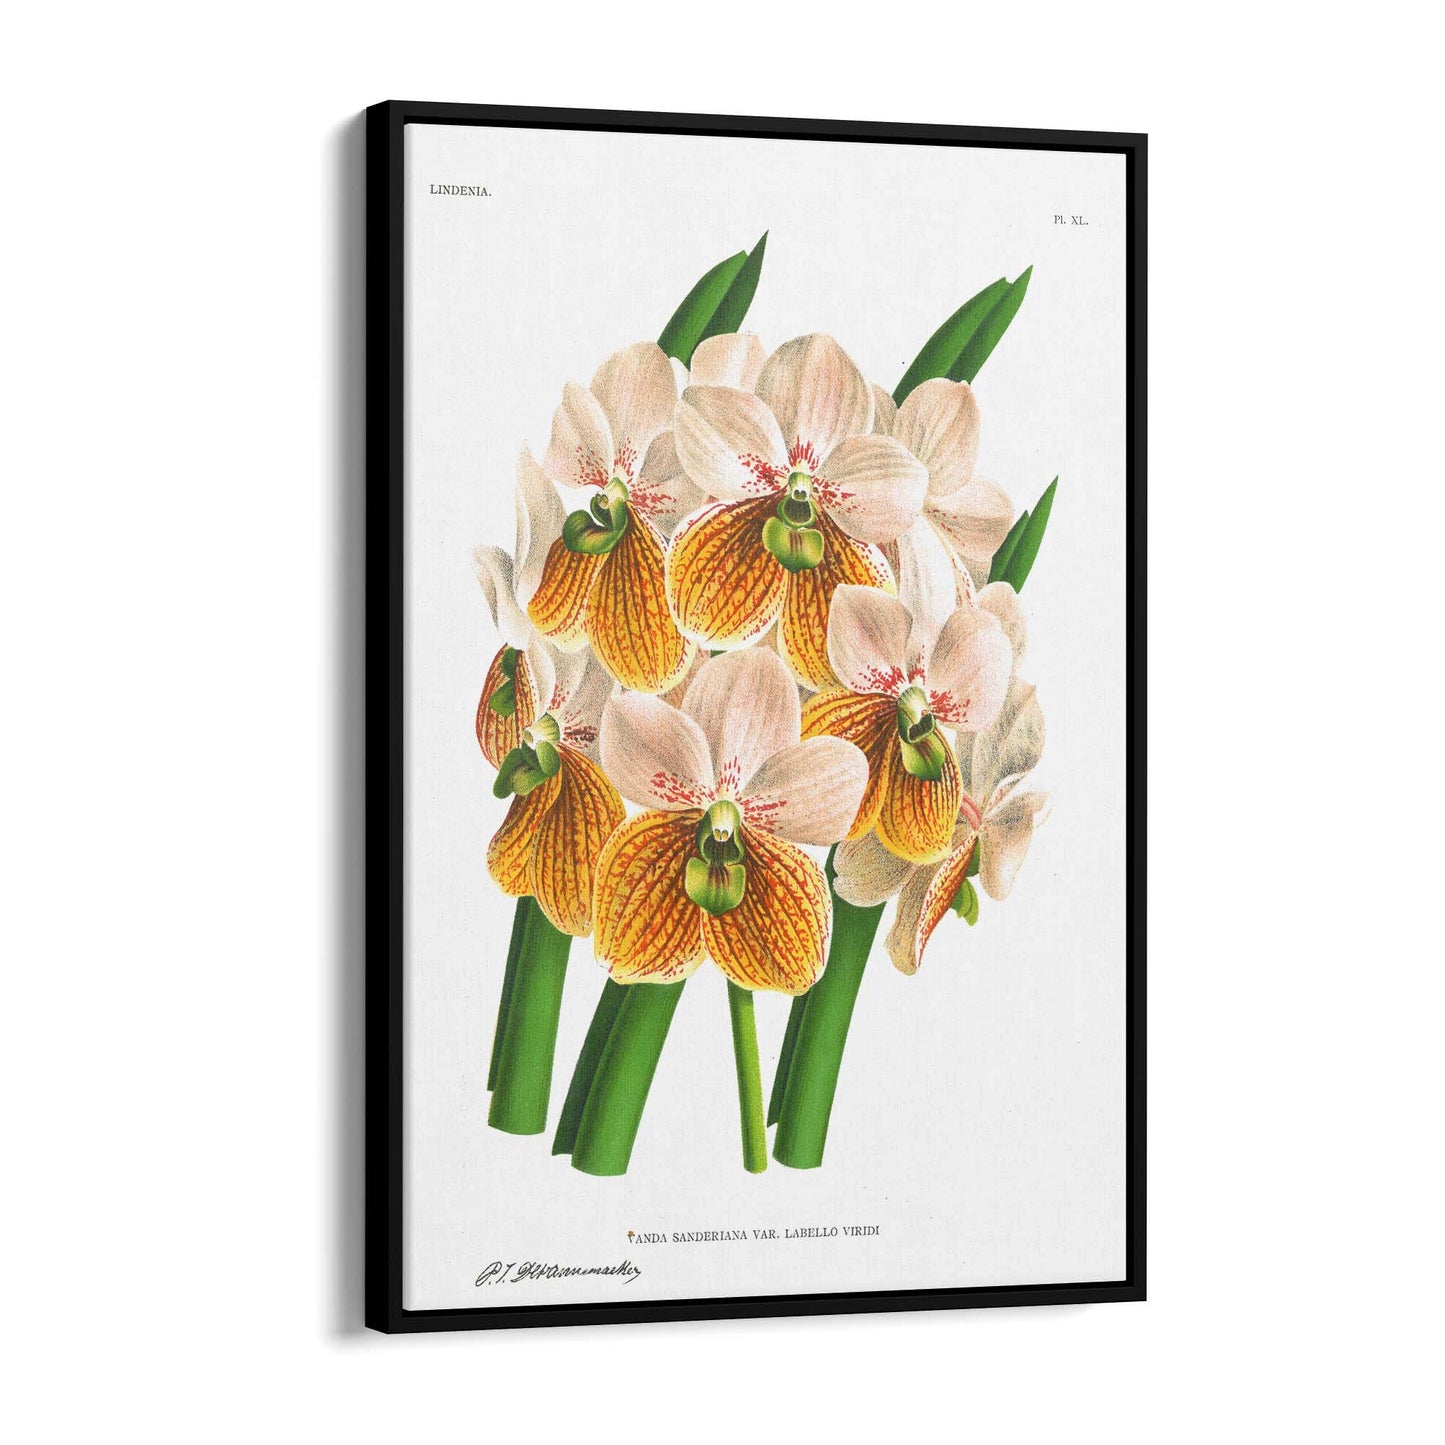 Yellow Flower Vintage Botanical Kitchen Wall Art #2 - The Affordable Art Company